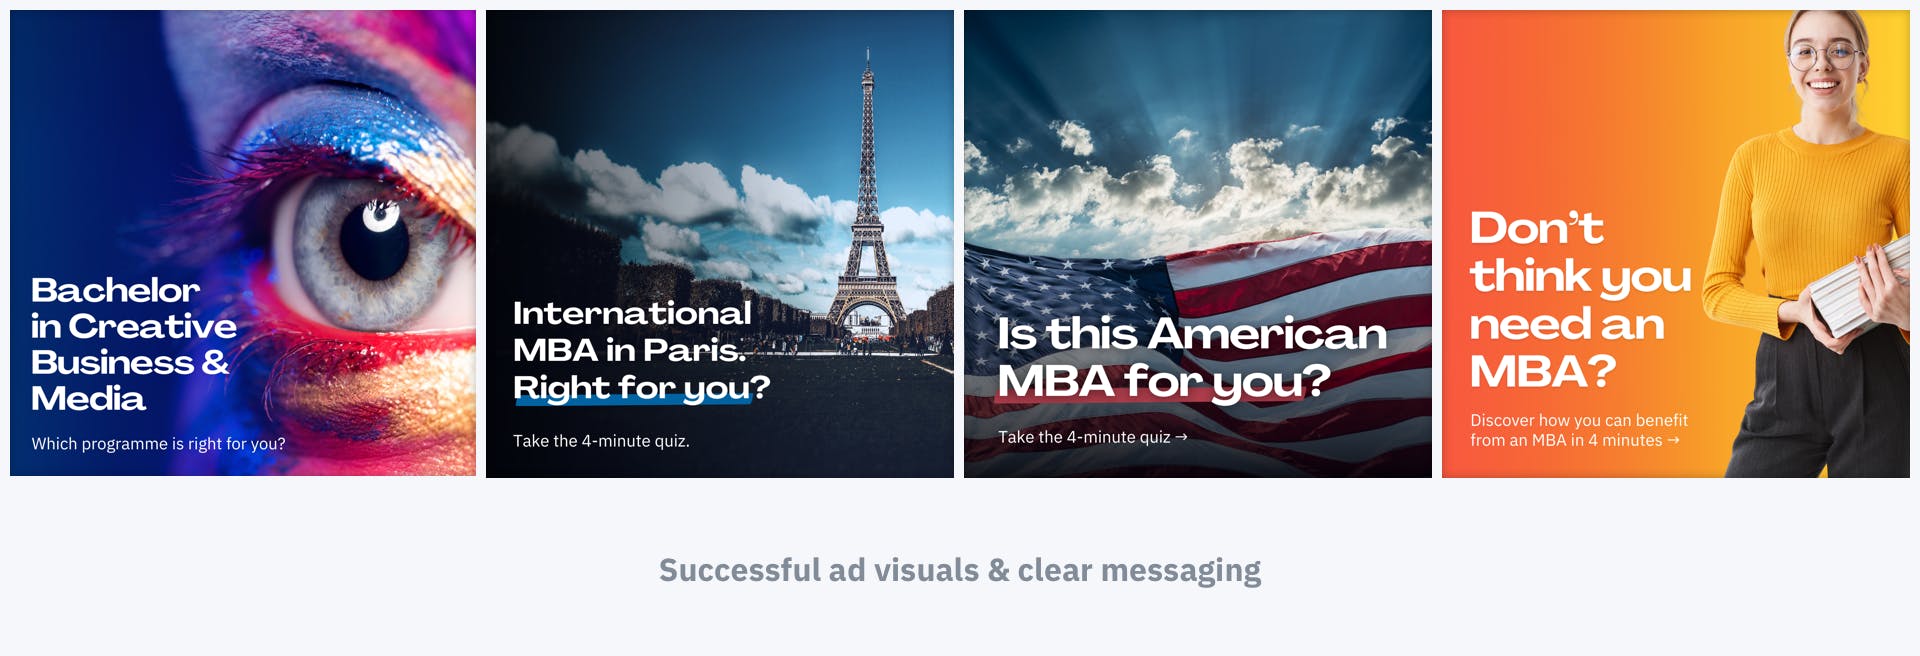 Examples of successful ads